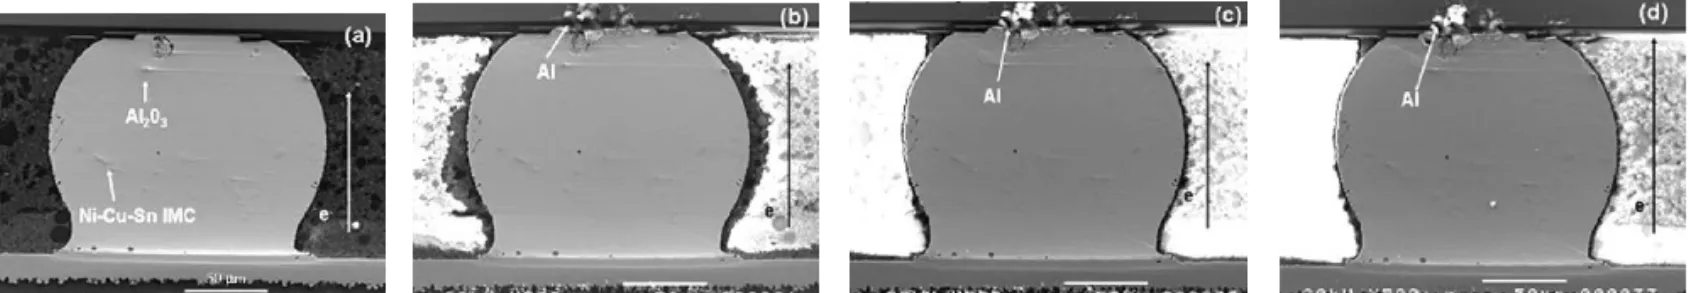 Figure 9 shows the cross-sectional SEM image of the solder bump along cross-sectioned plane B